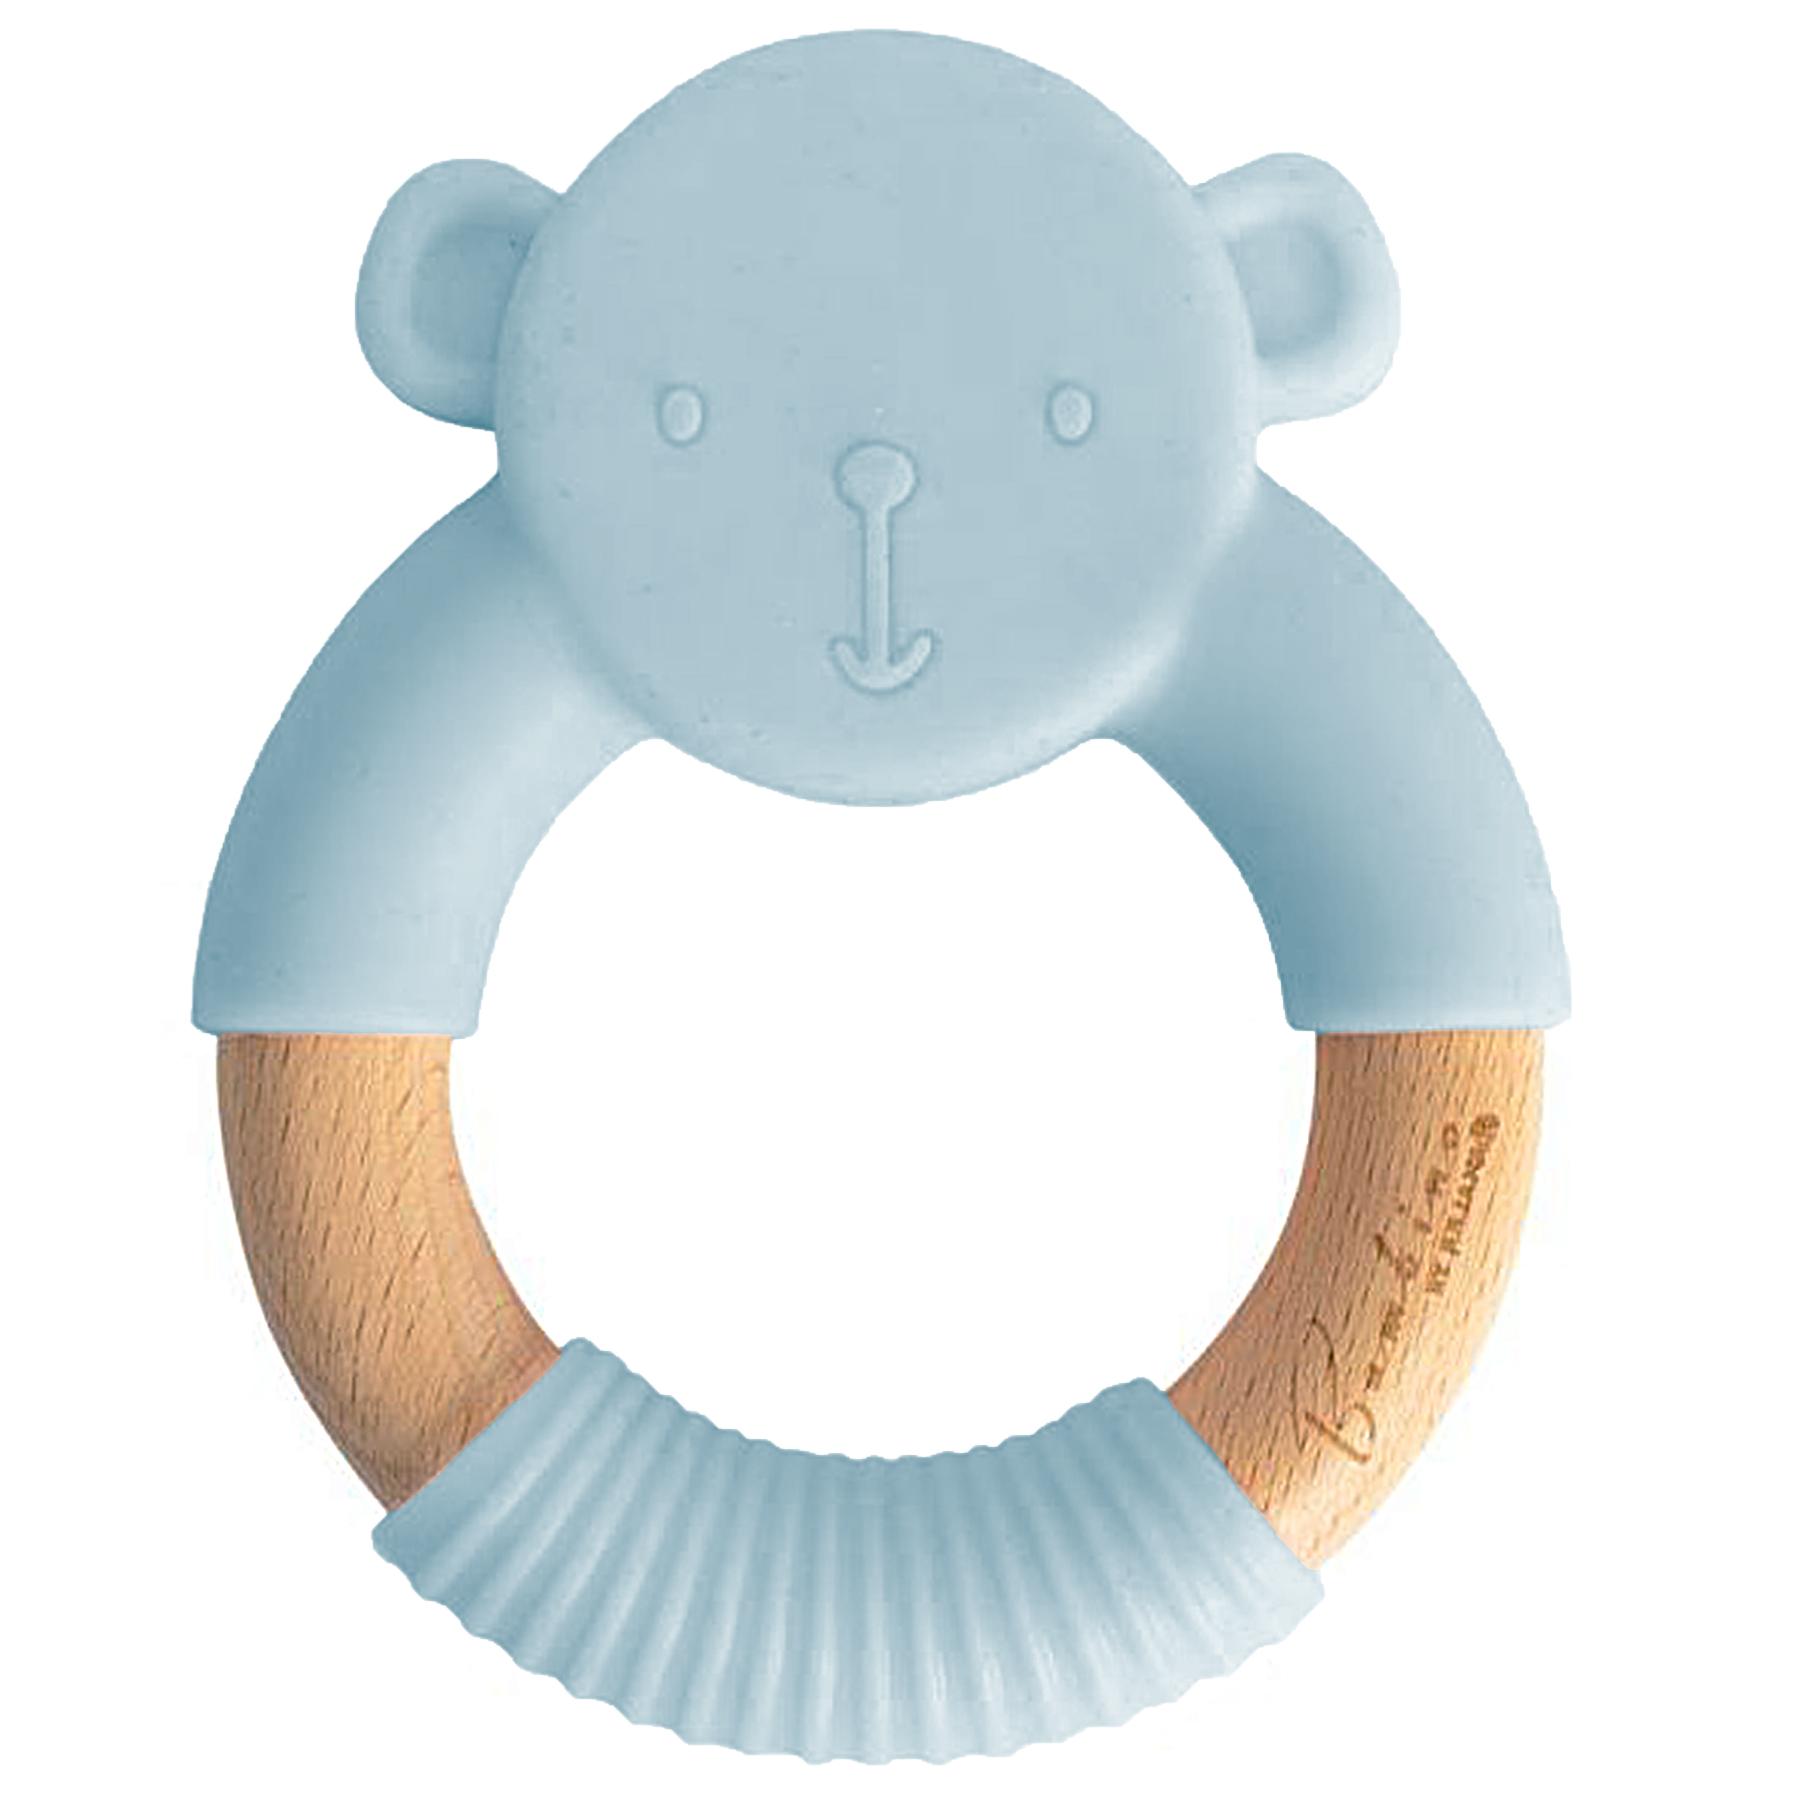 Bambino by Juliana® Round Blue Silicone Teddy & Wood Teether